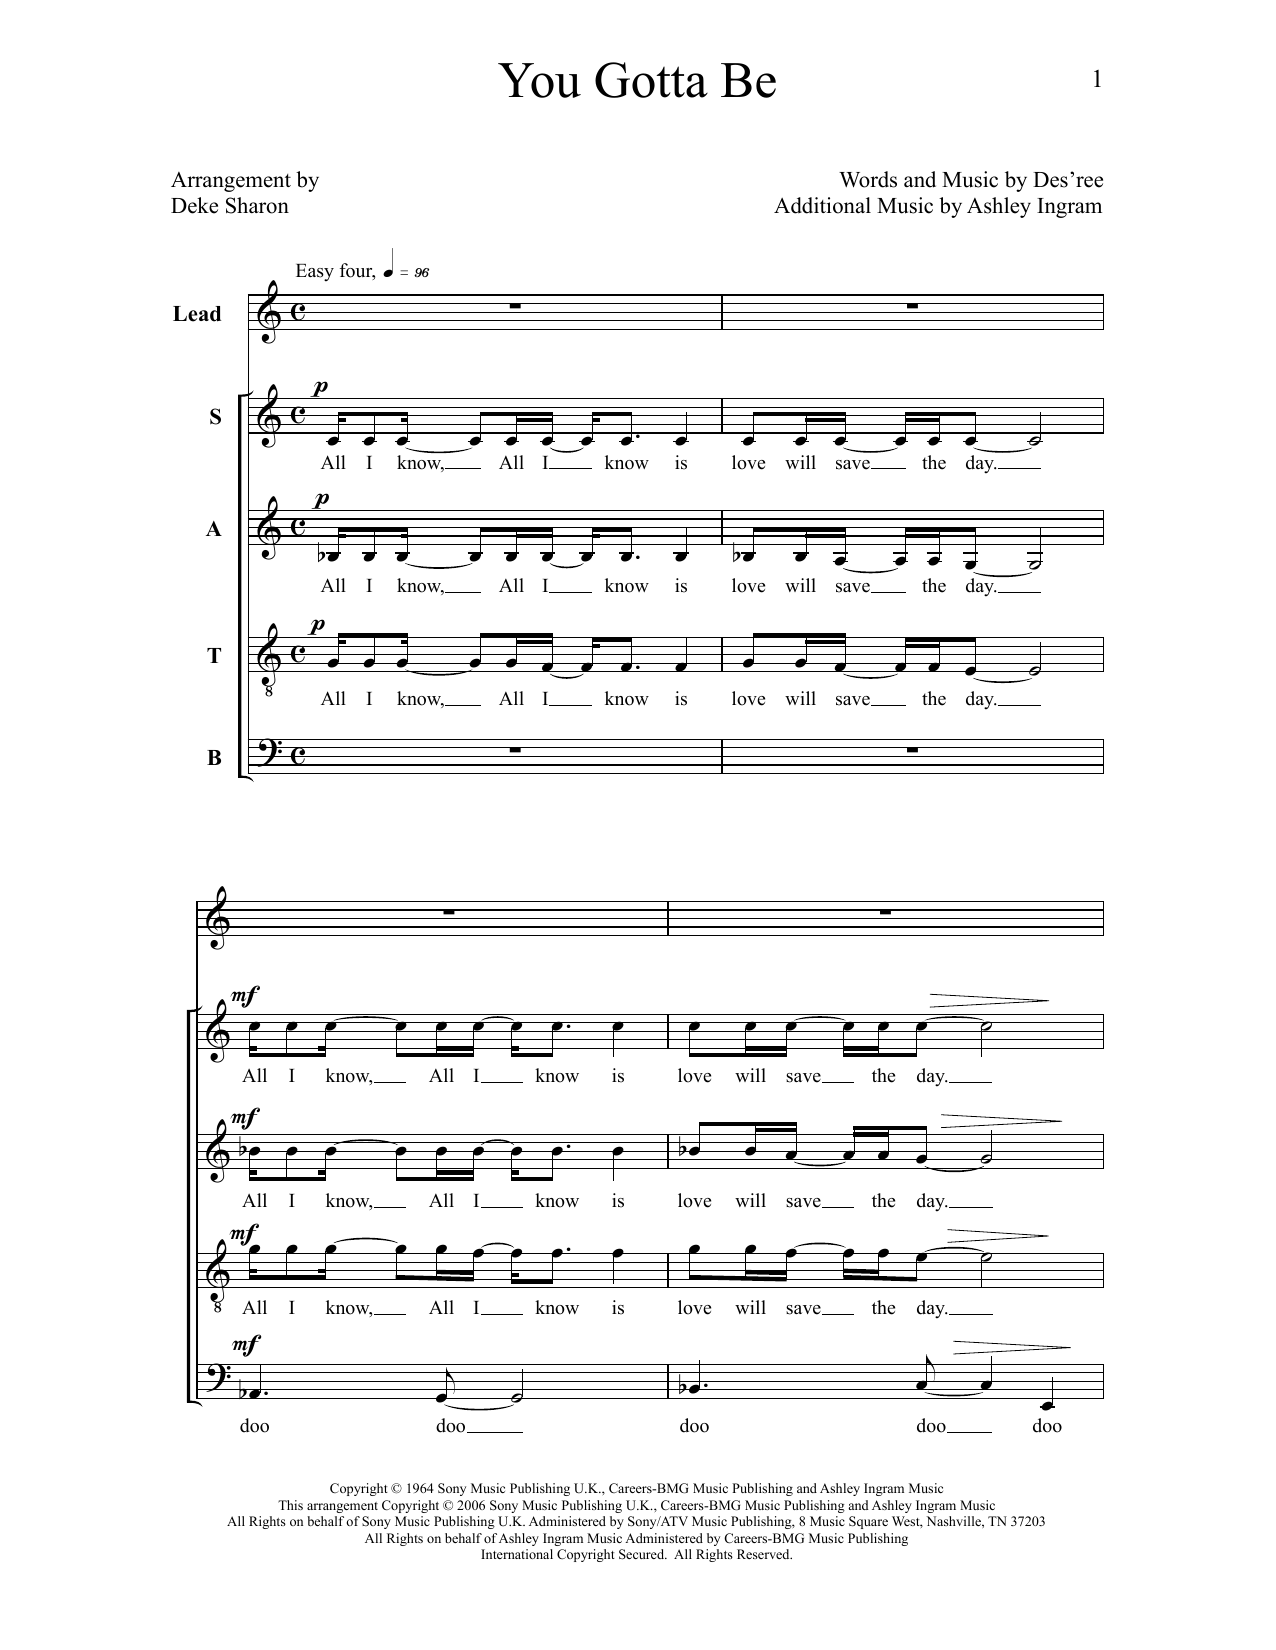 Deke Sharon You Gotta Be sheet music notes and chords. Download Printable PDF.